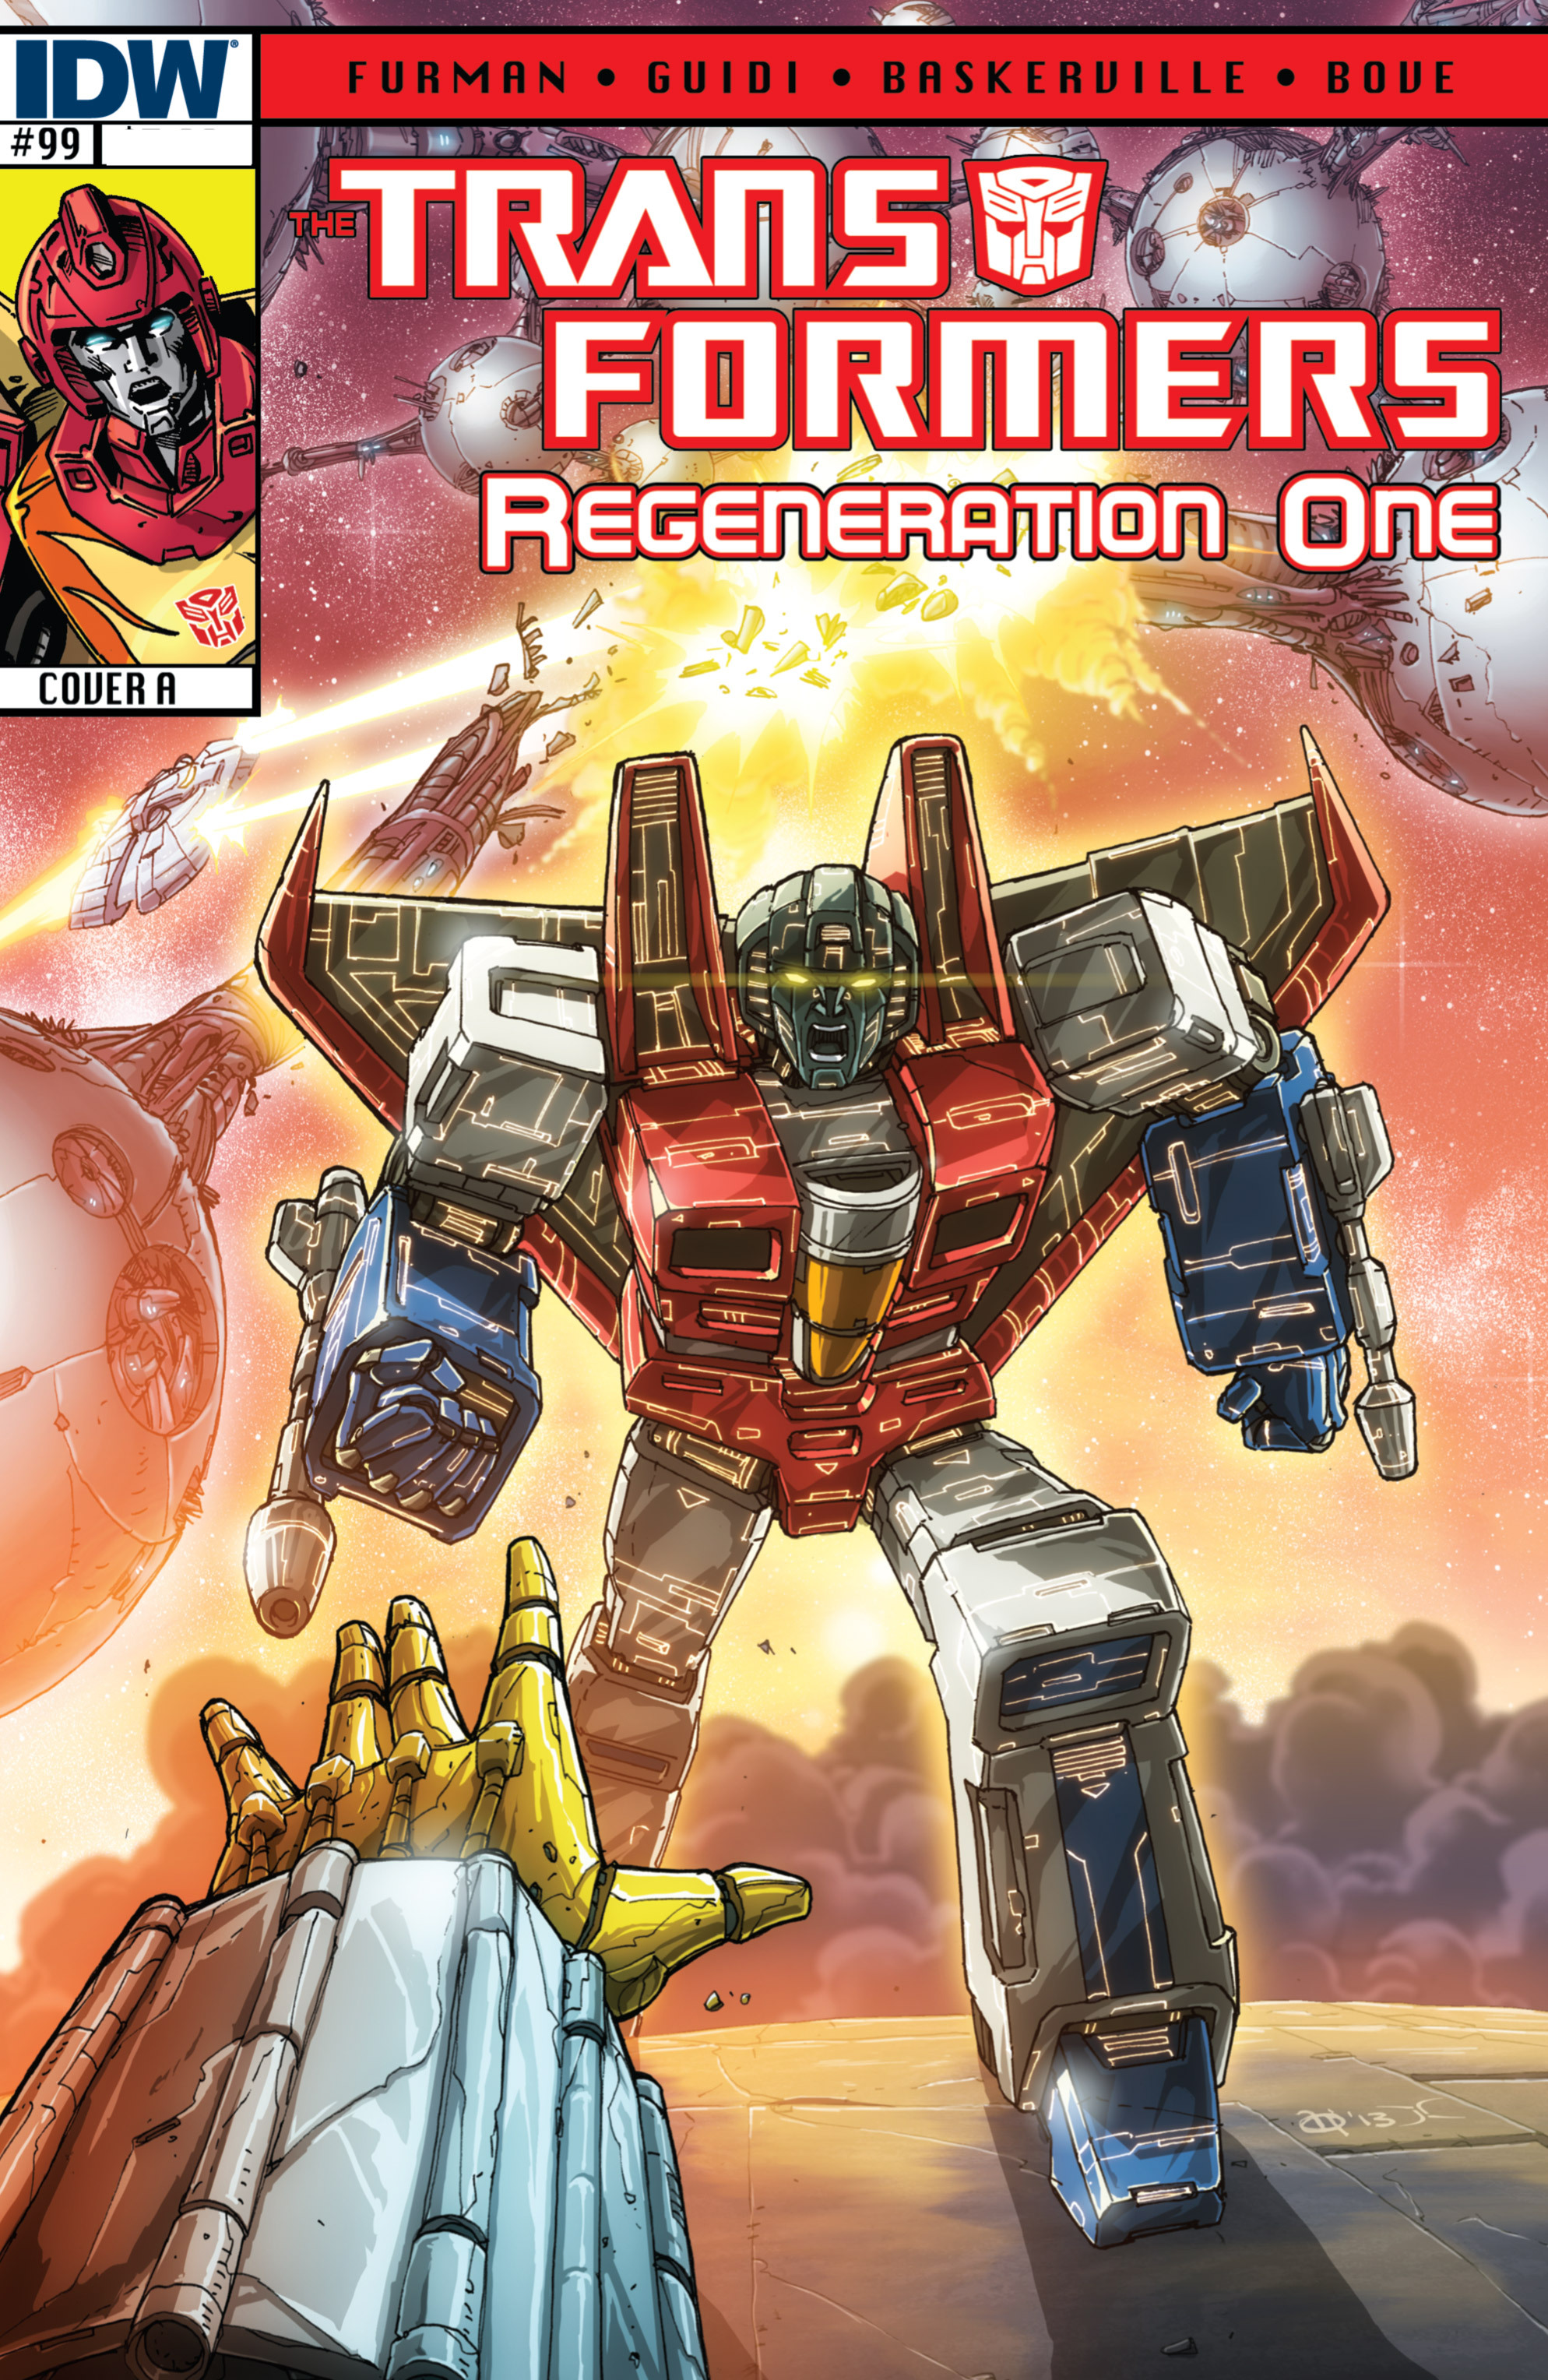 Read online The Transformers: Regeneration One comic -  Issue #99 - 1